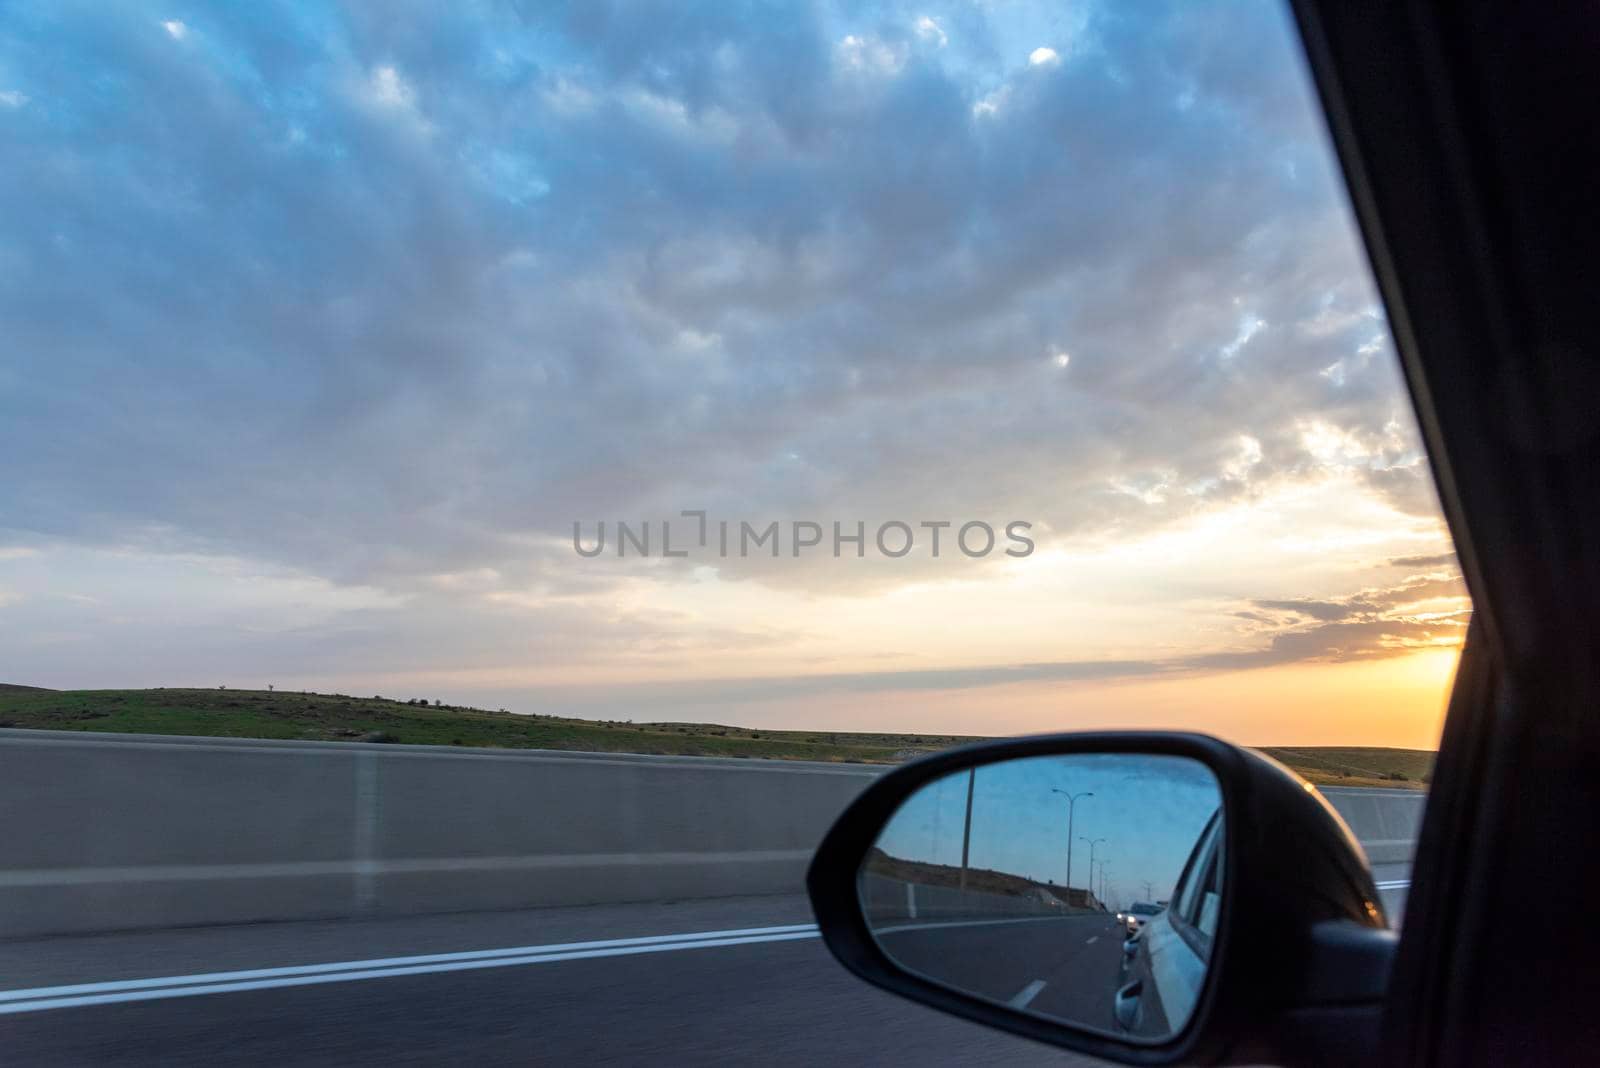 Road and sky seen from the sidecar mirror. High quality photo